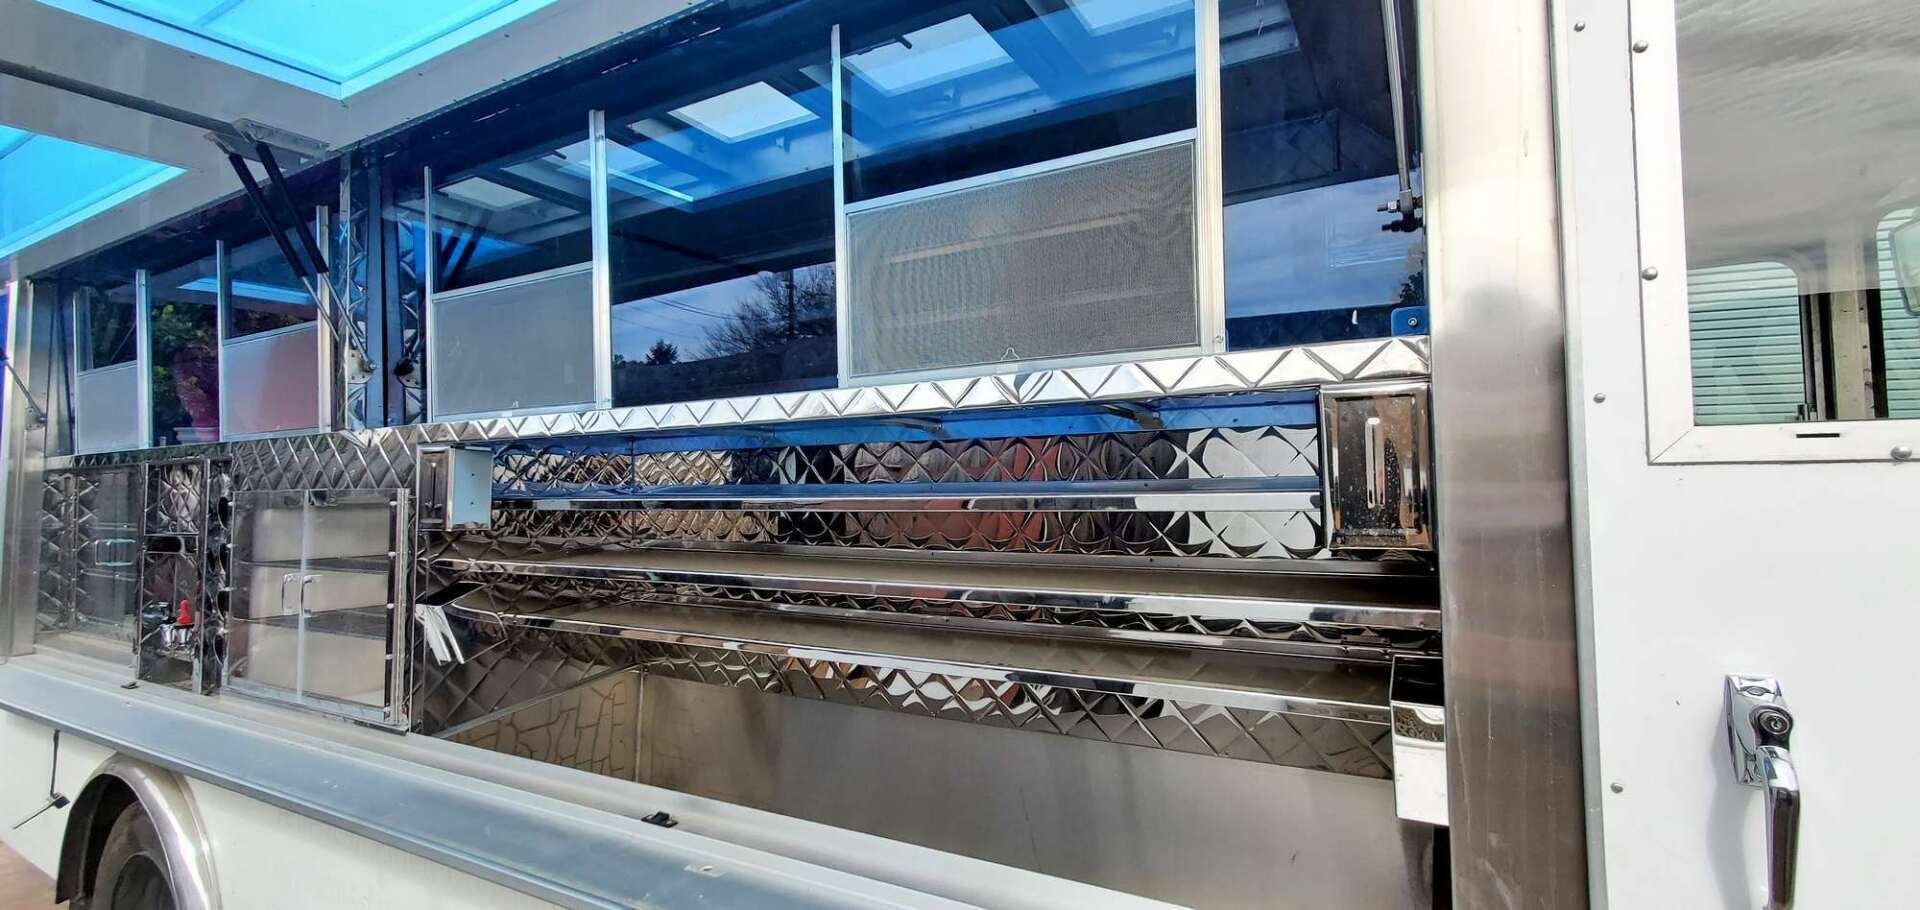 The inside of a stainless steel food truck with a window.